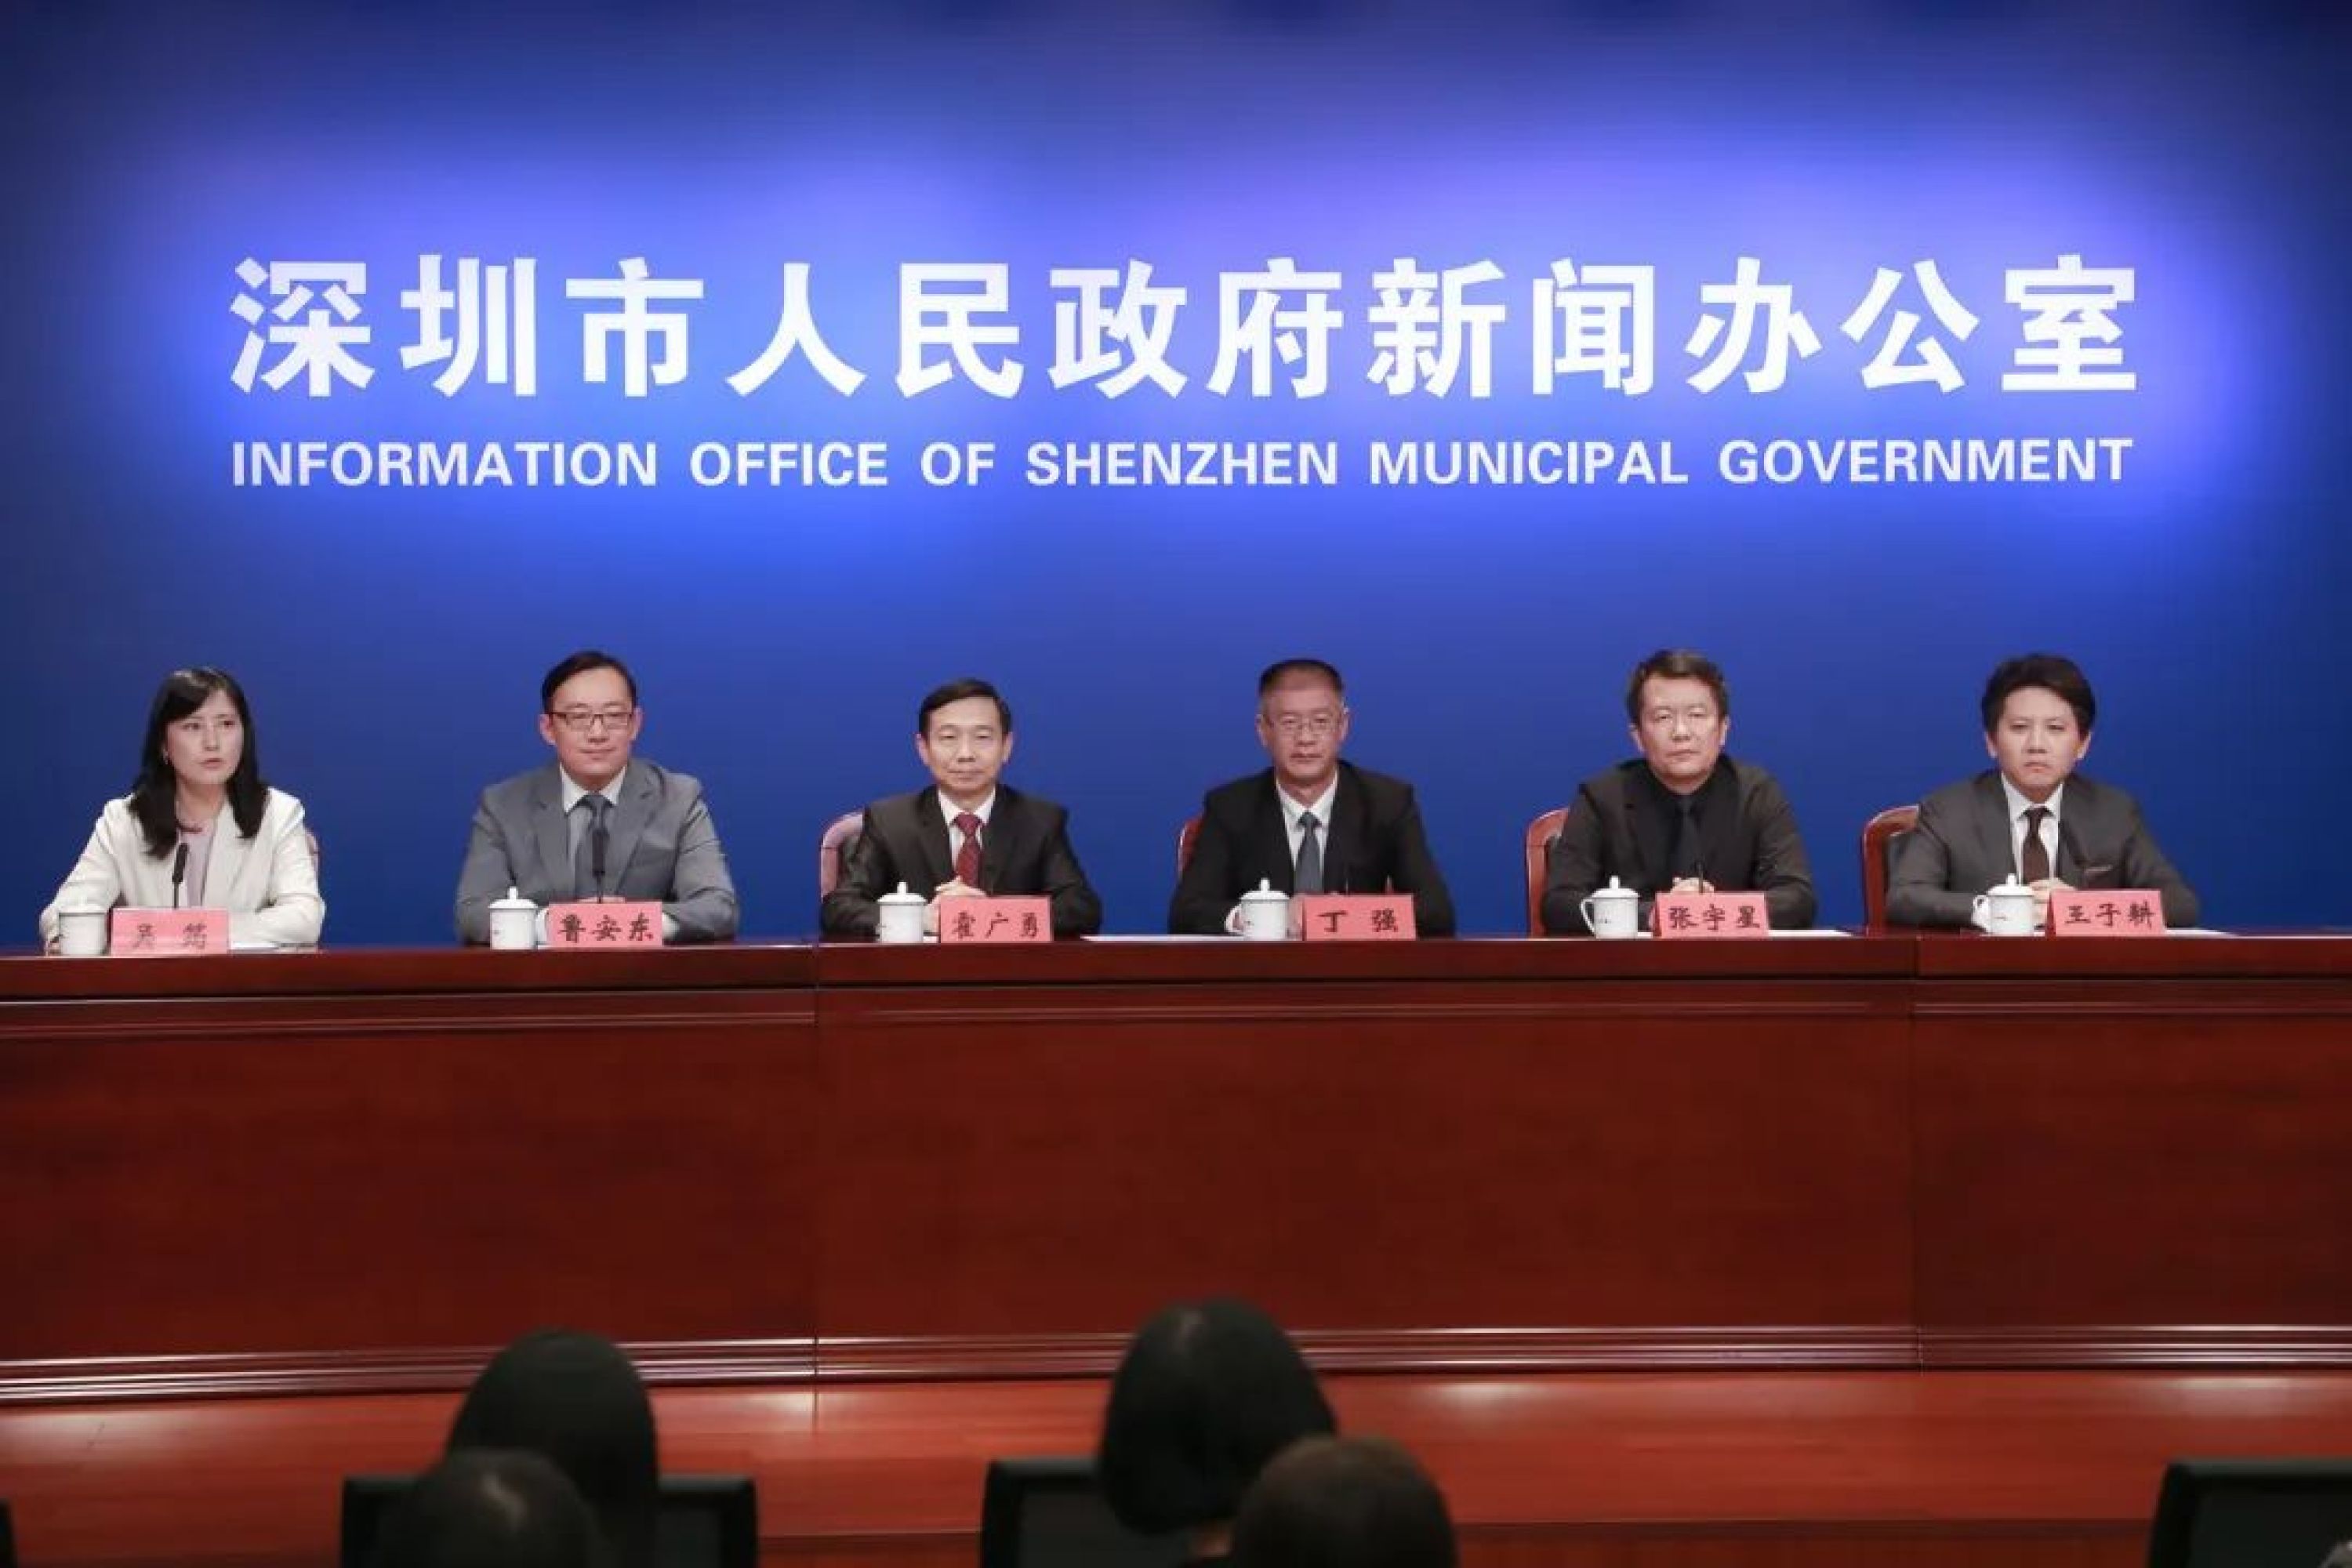 The 9th Bi-City Biennale of Urbanism/Architecture (Shenzhen) Held its First Press Conference at the Shenzhen Municipal Government Press Conference Hall